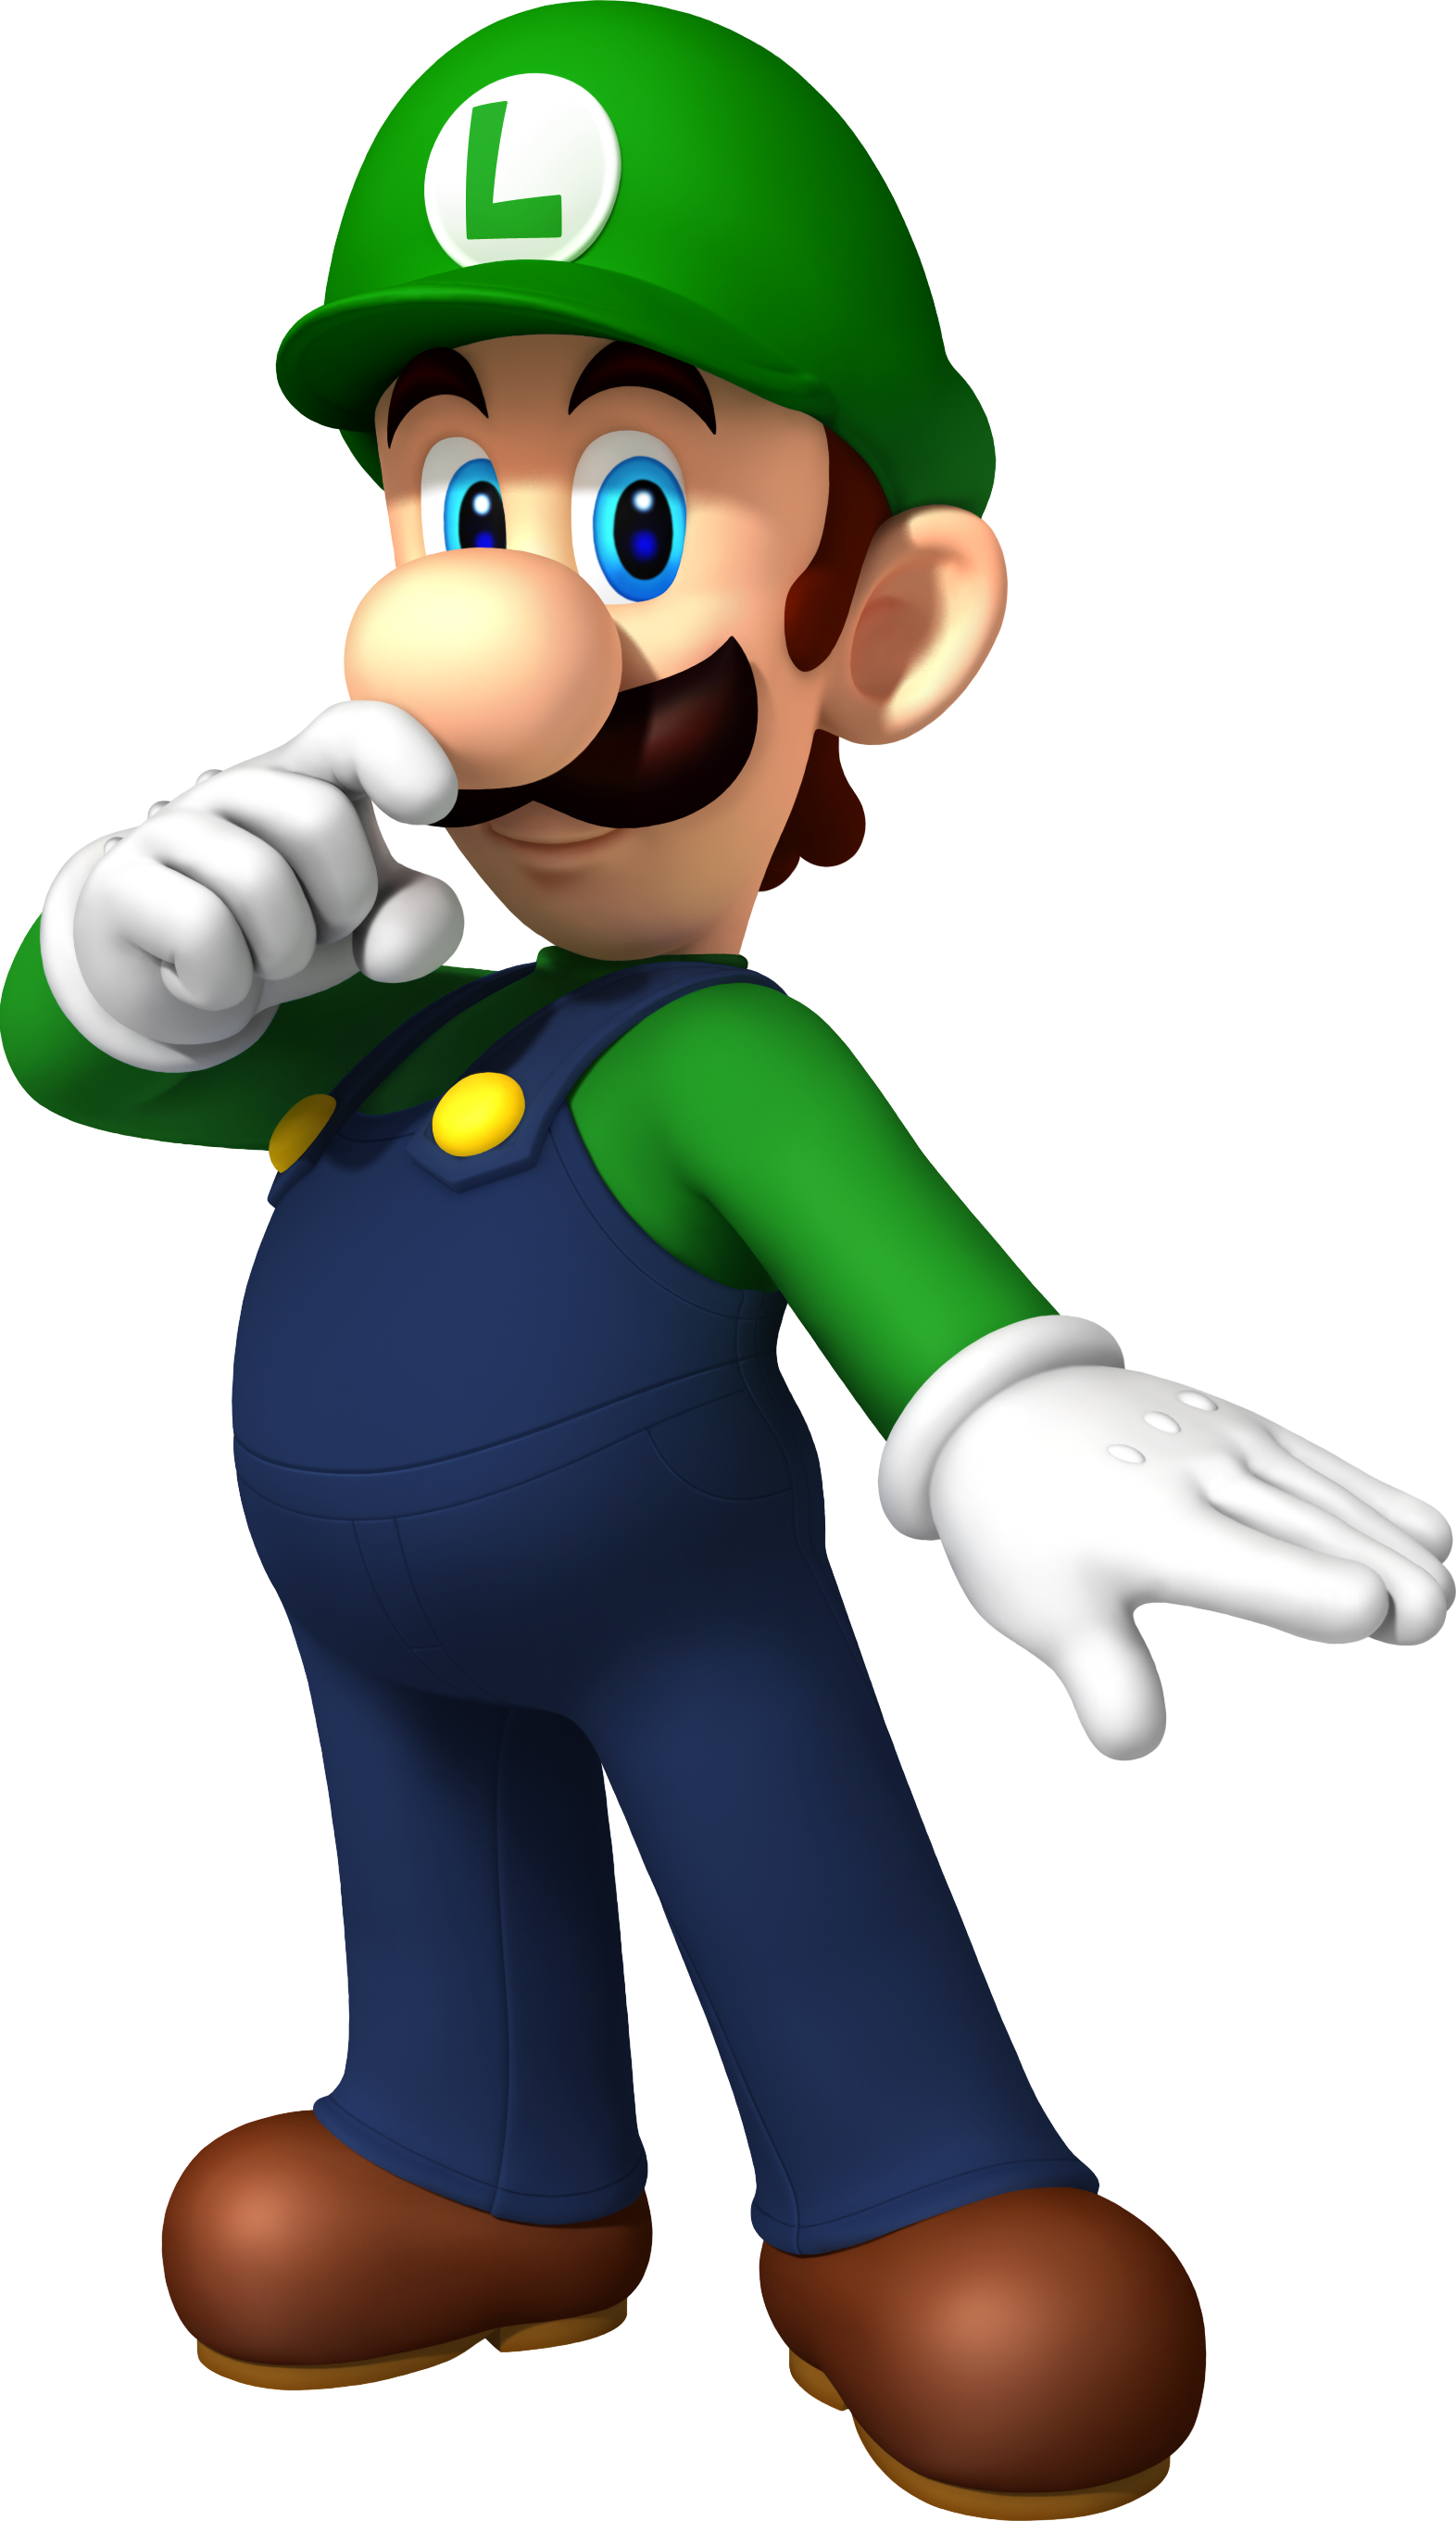 Luigi Is A Character From The Super Mario Series, And - Luigi Super Mario Kart (1572x2721)